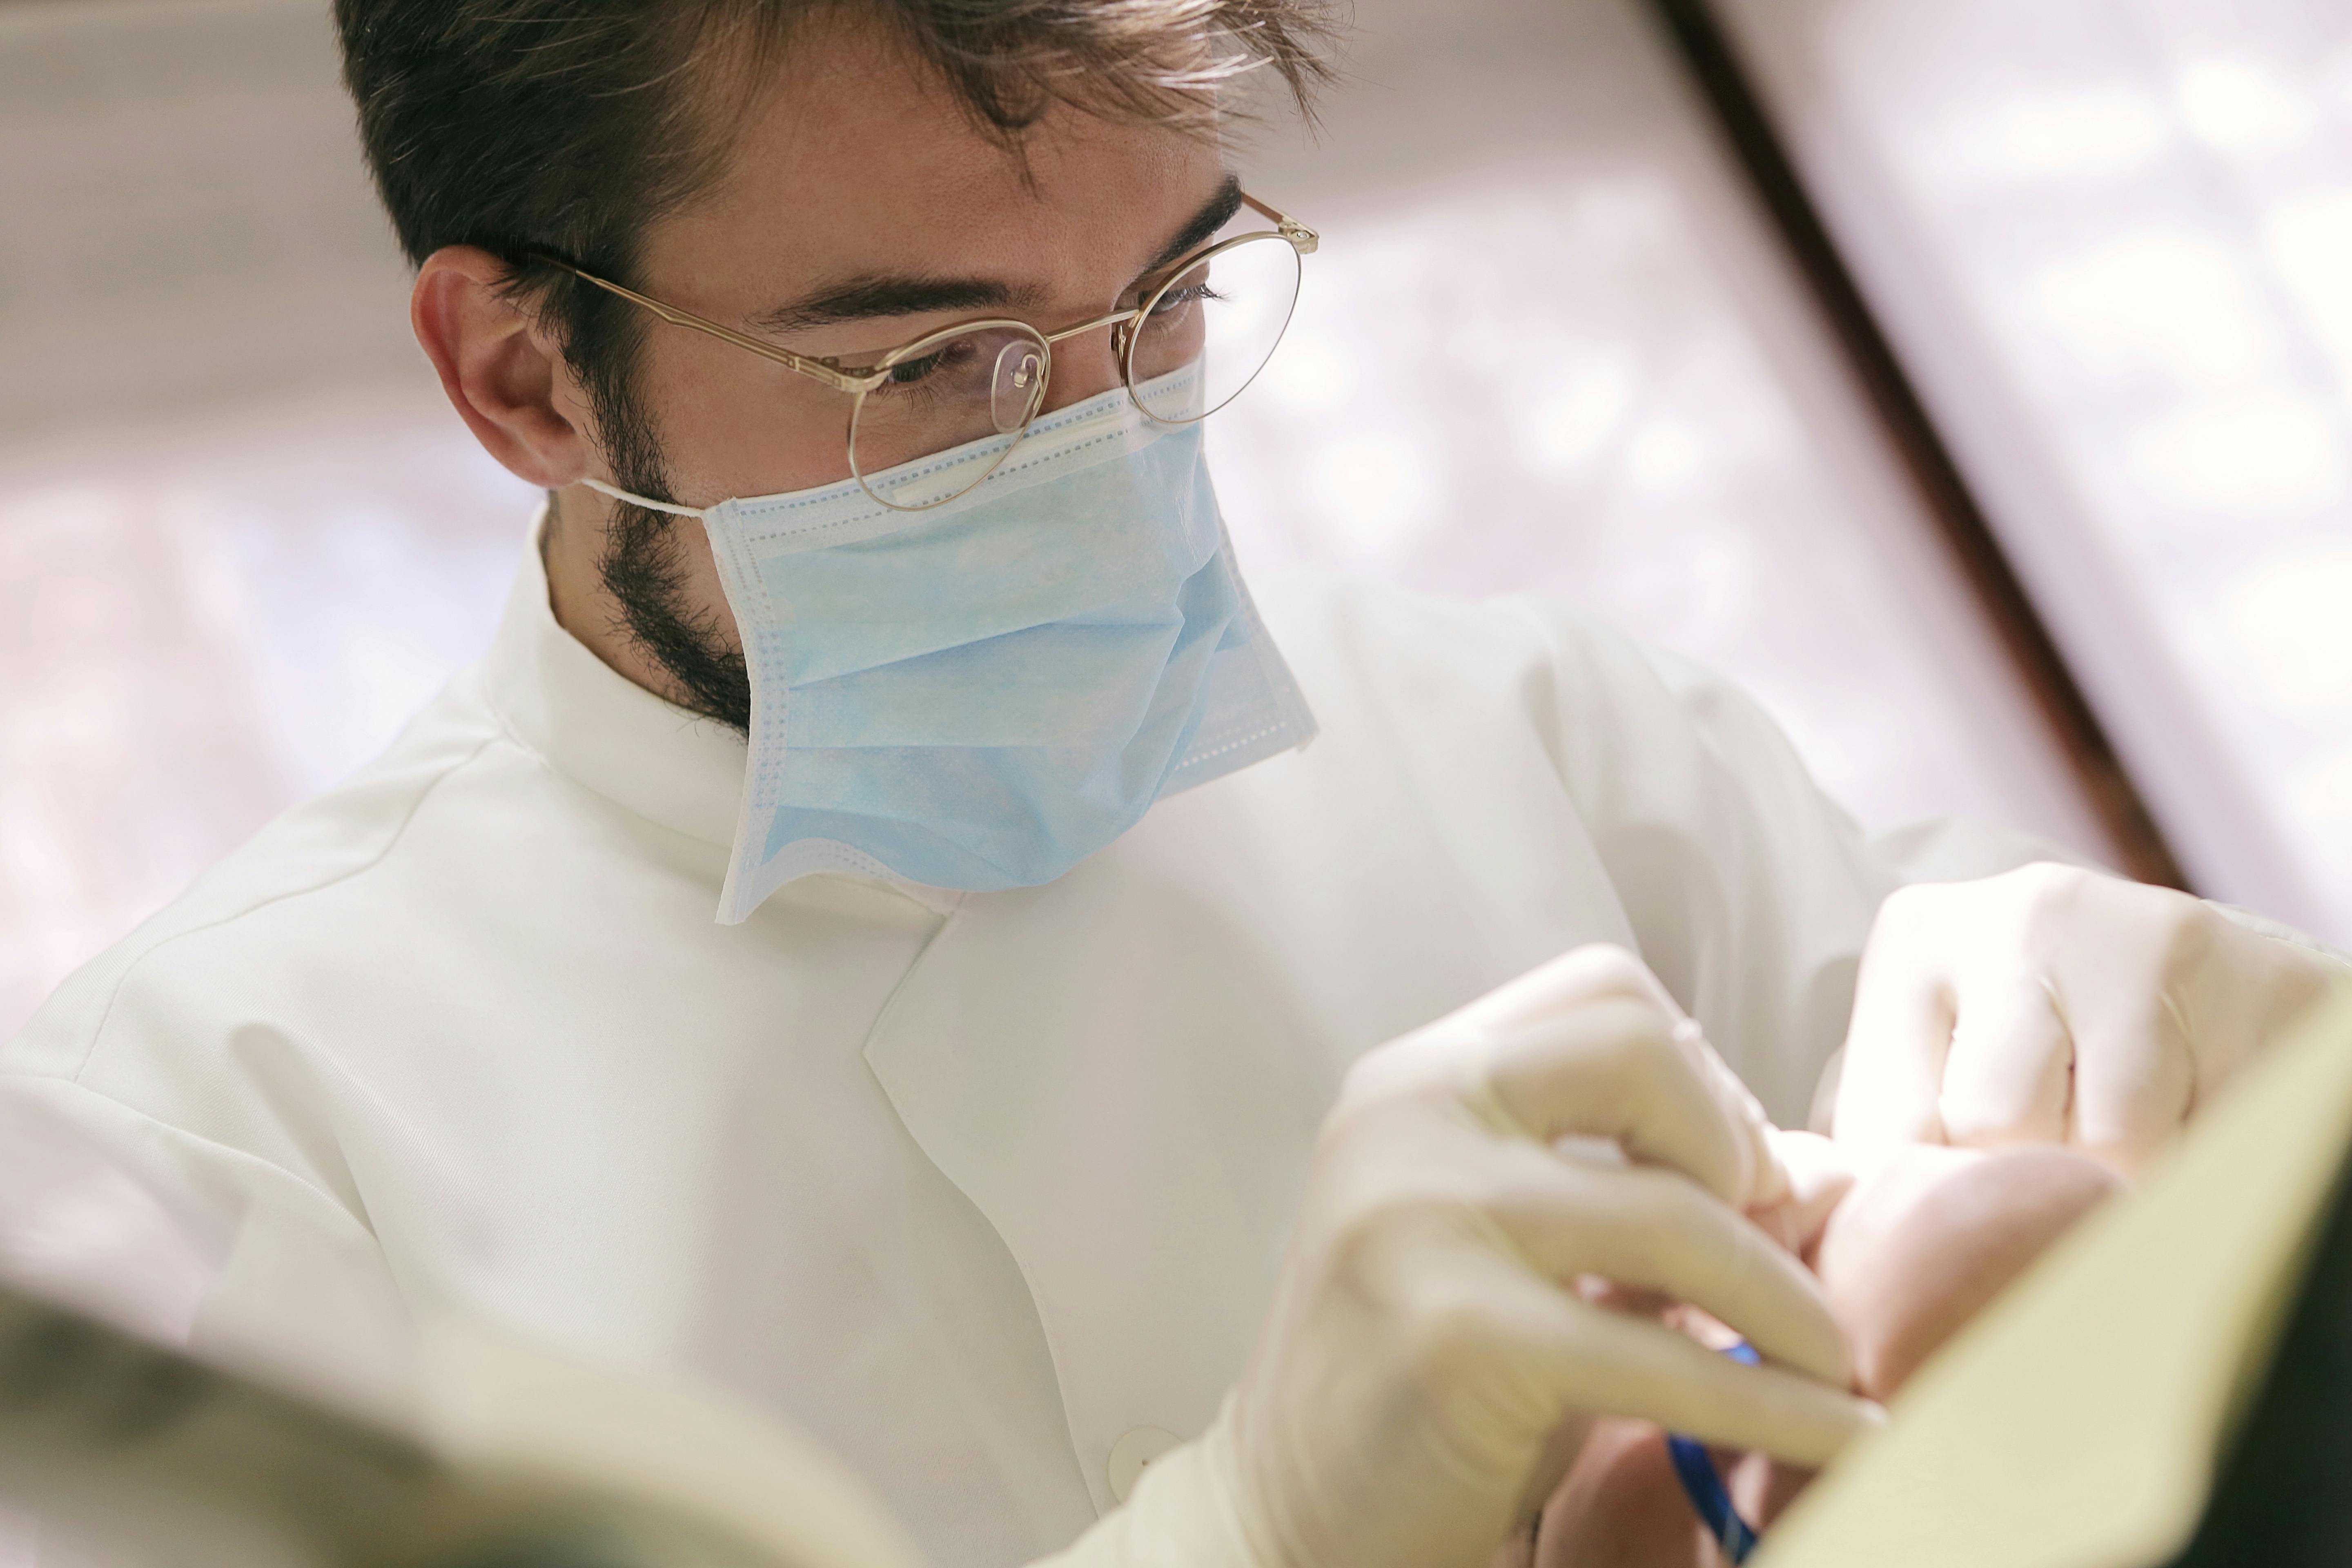 Dentist cleaning the patient's teeth. | Photo: Pexels